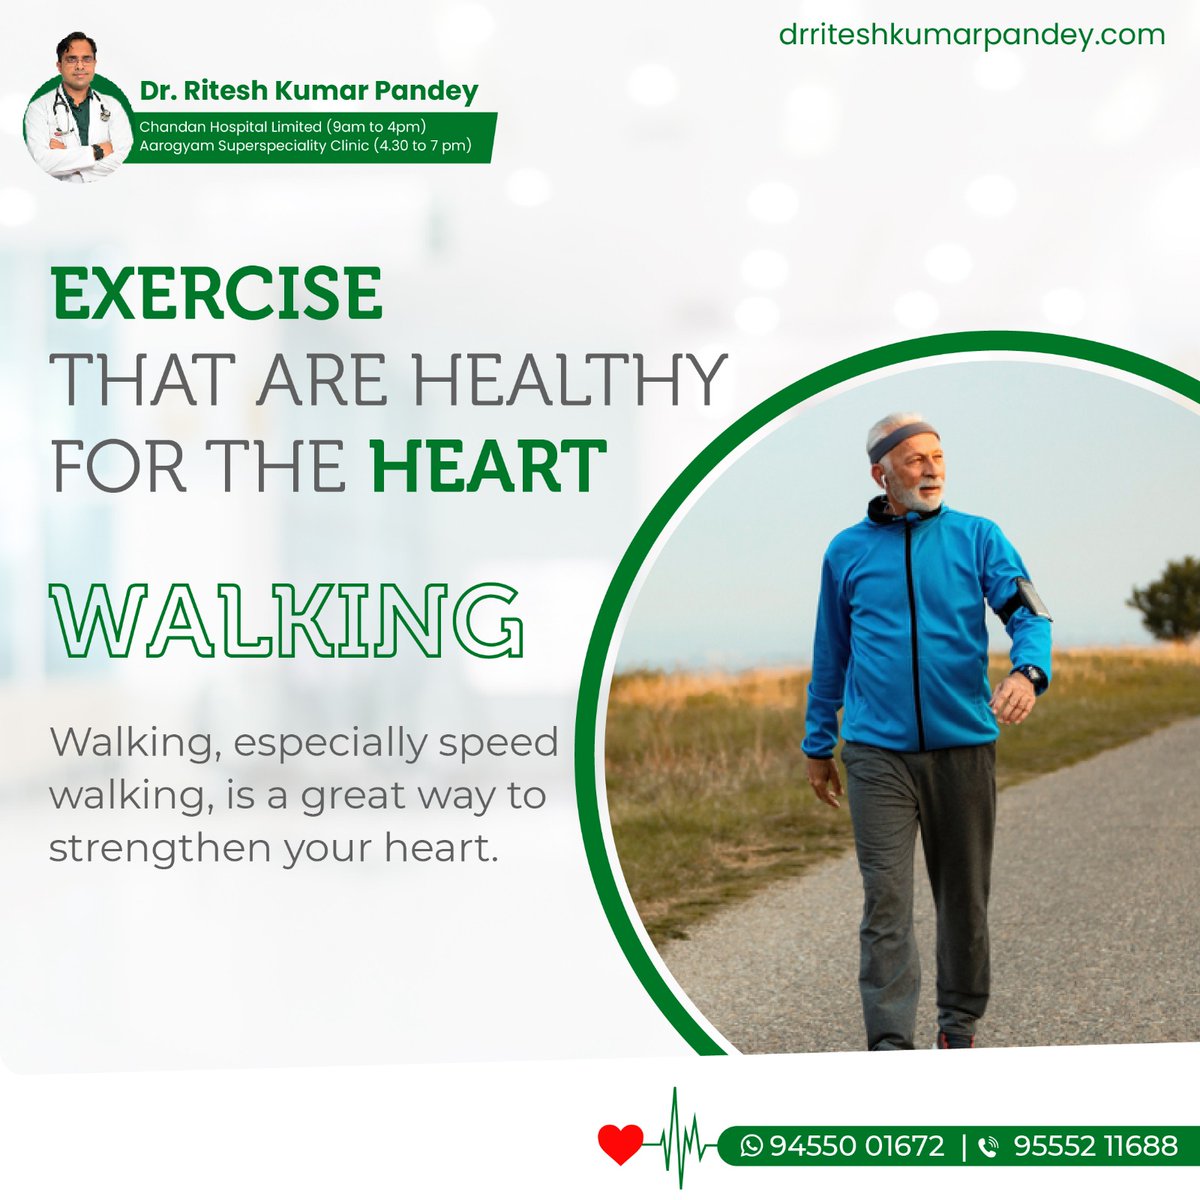 Exercise that are healthy for the heart - walking, especially speed walking, is a great way to strengthen your heart.

#DrRiteshKumarPandey #HeartHealth #ExerciseForHeart #HeartHealth #ExerciseTips #WalkingWorkout #HealthyLiving #FitnessJourney #CardiovascularHealth #HealthyHeart